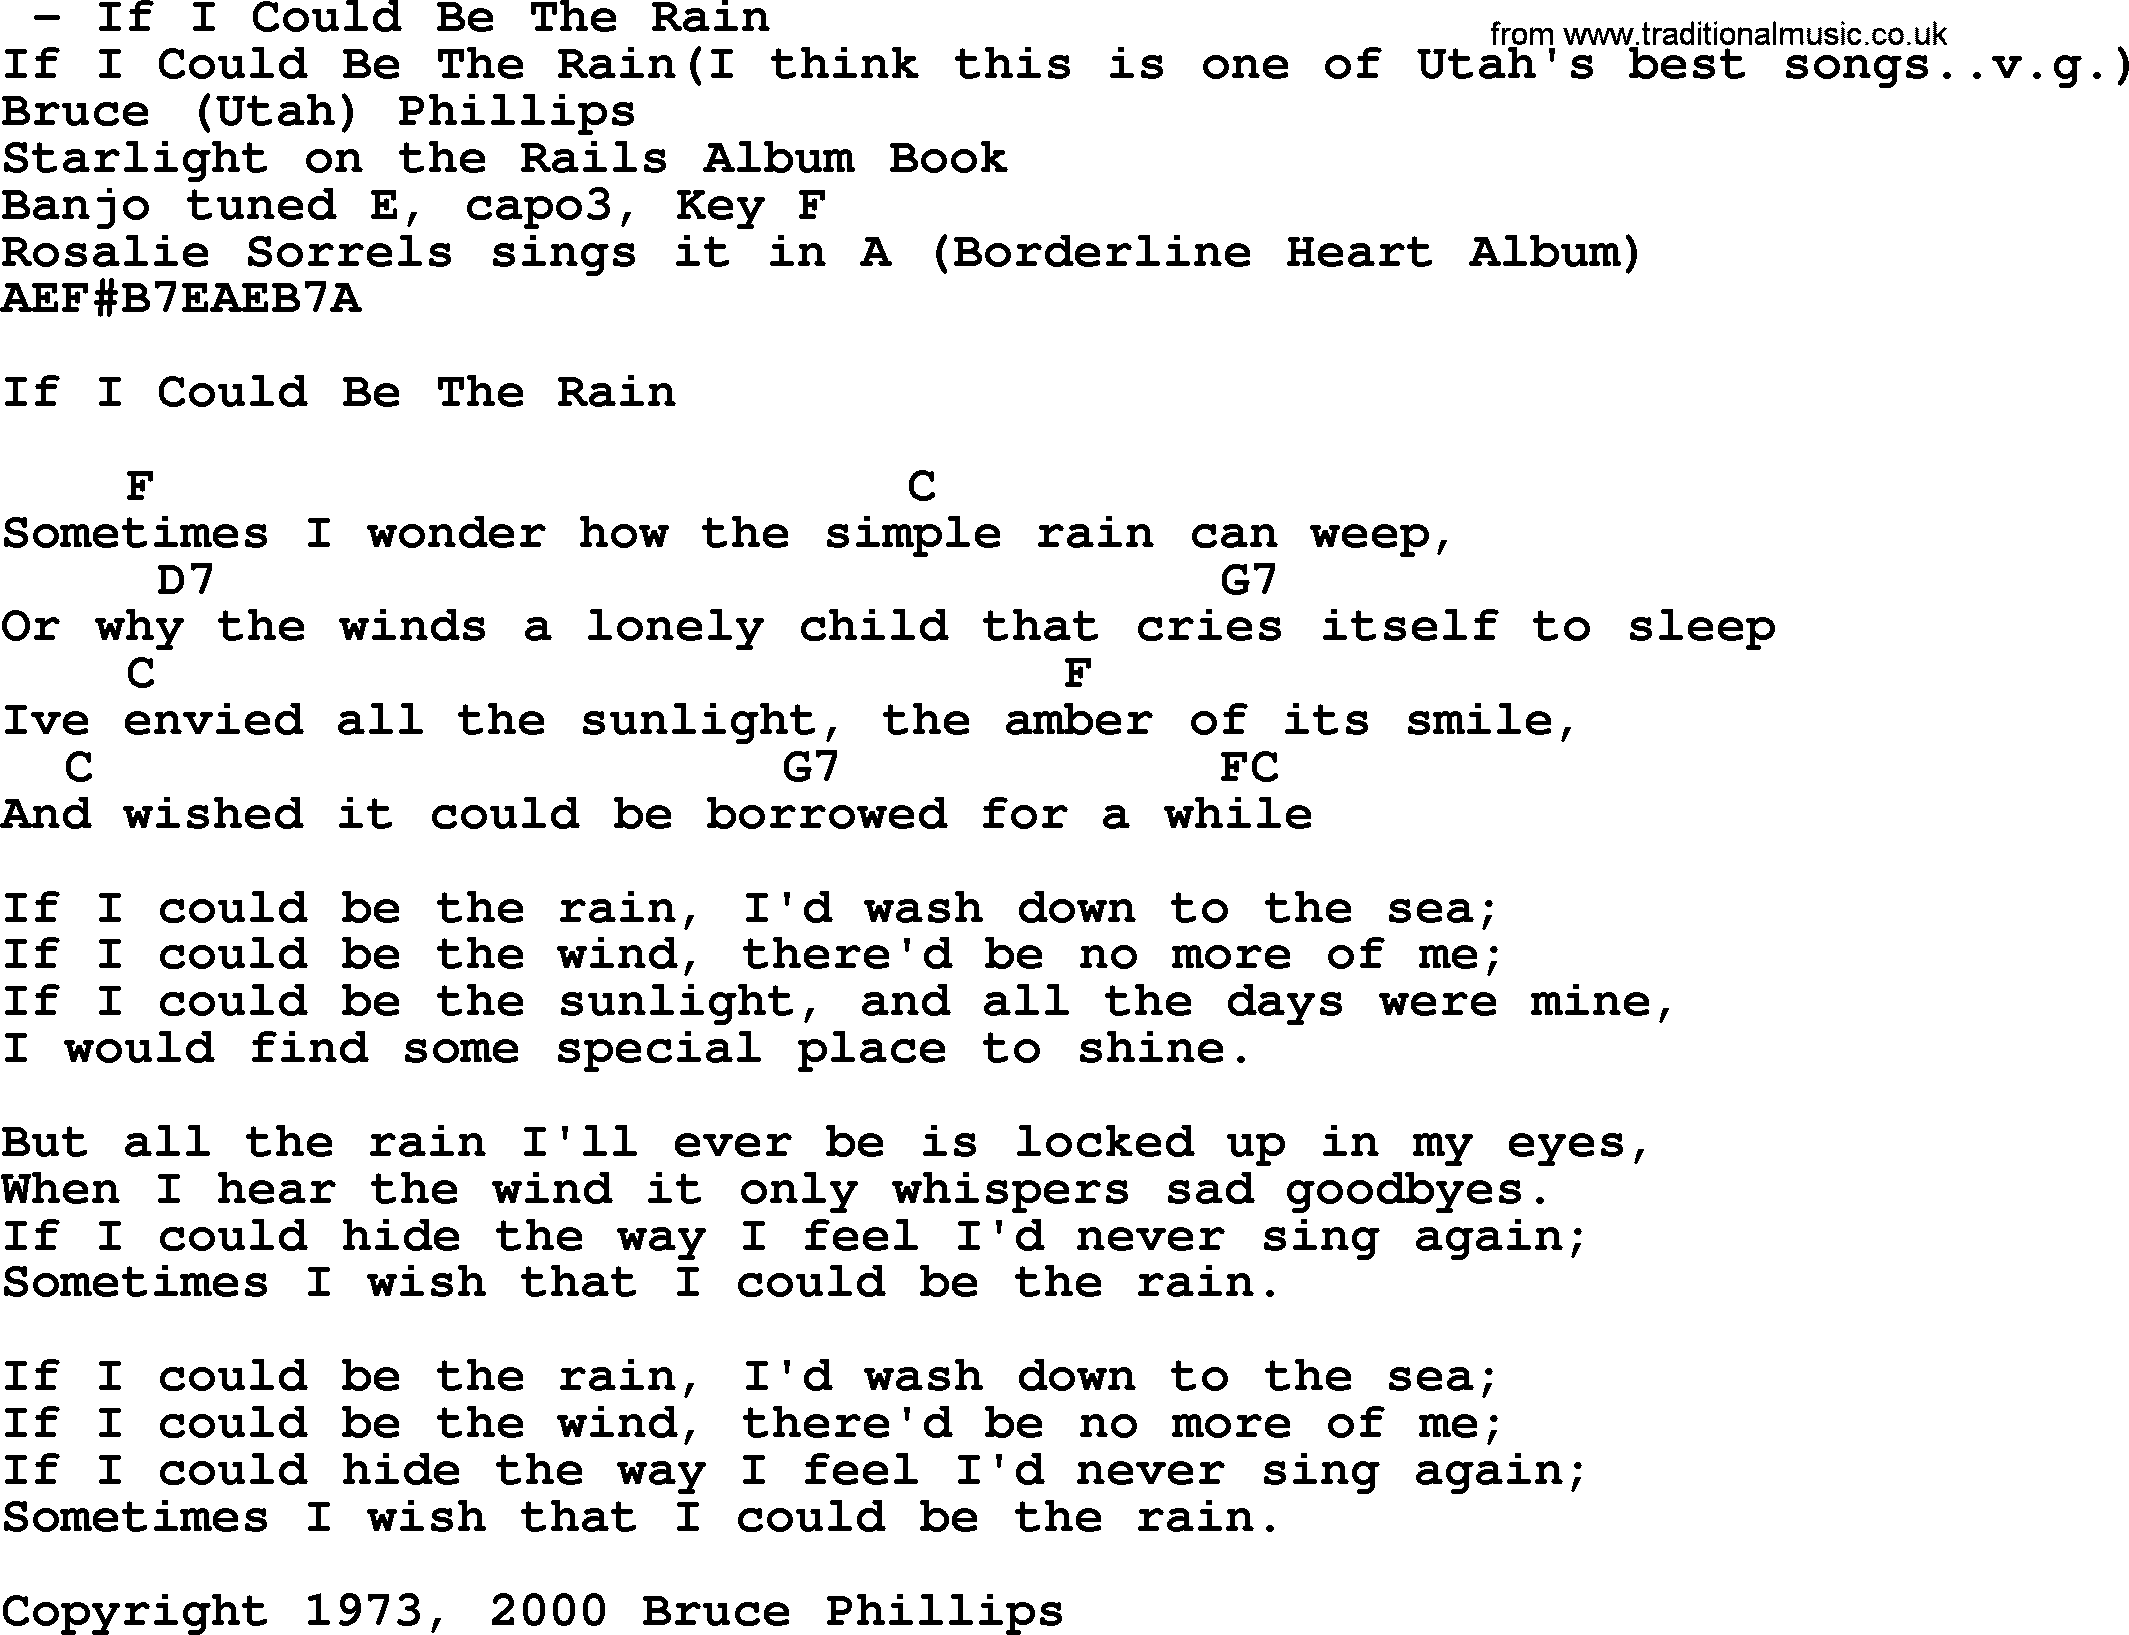 Bluegrass song: If I Could Be The Rain, lyrics and chords